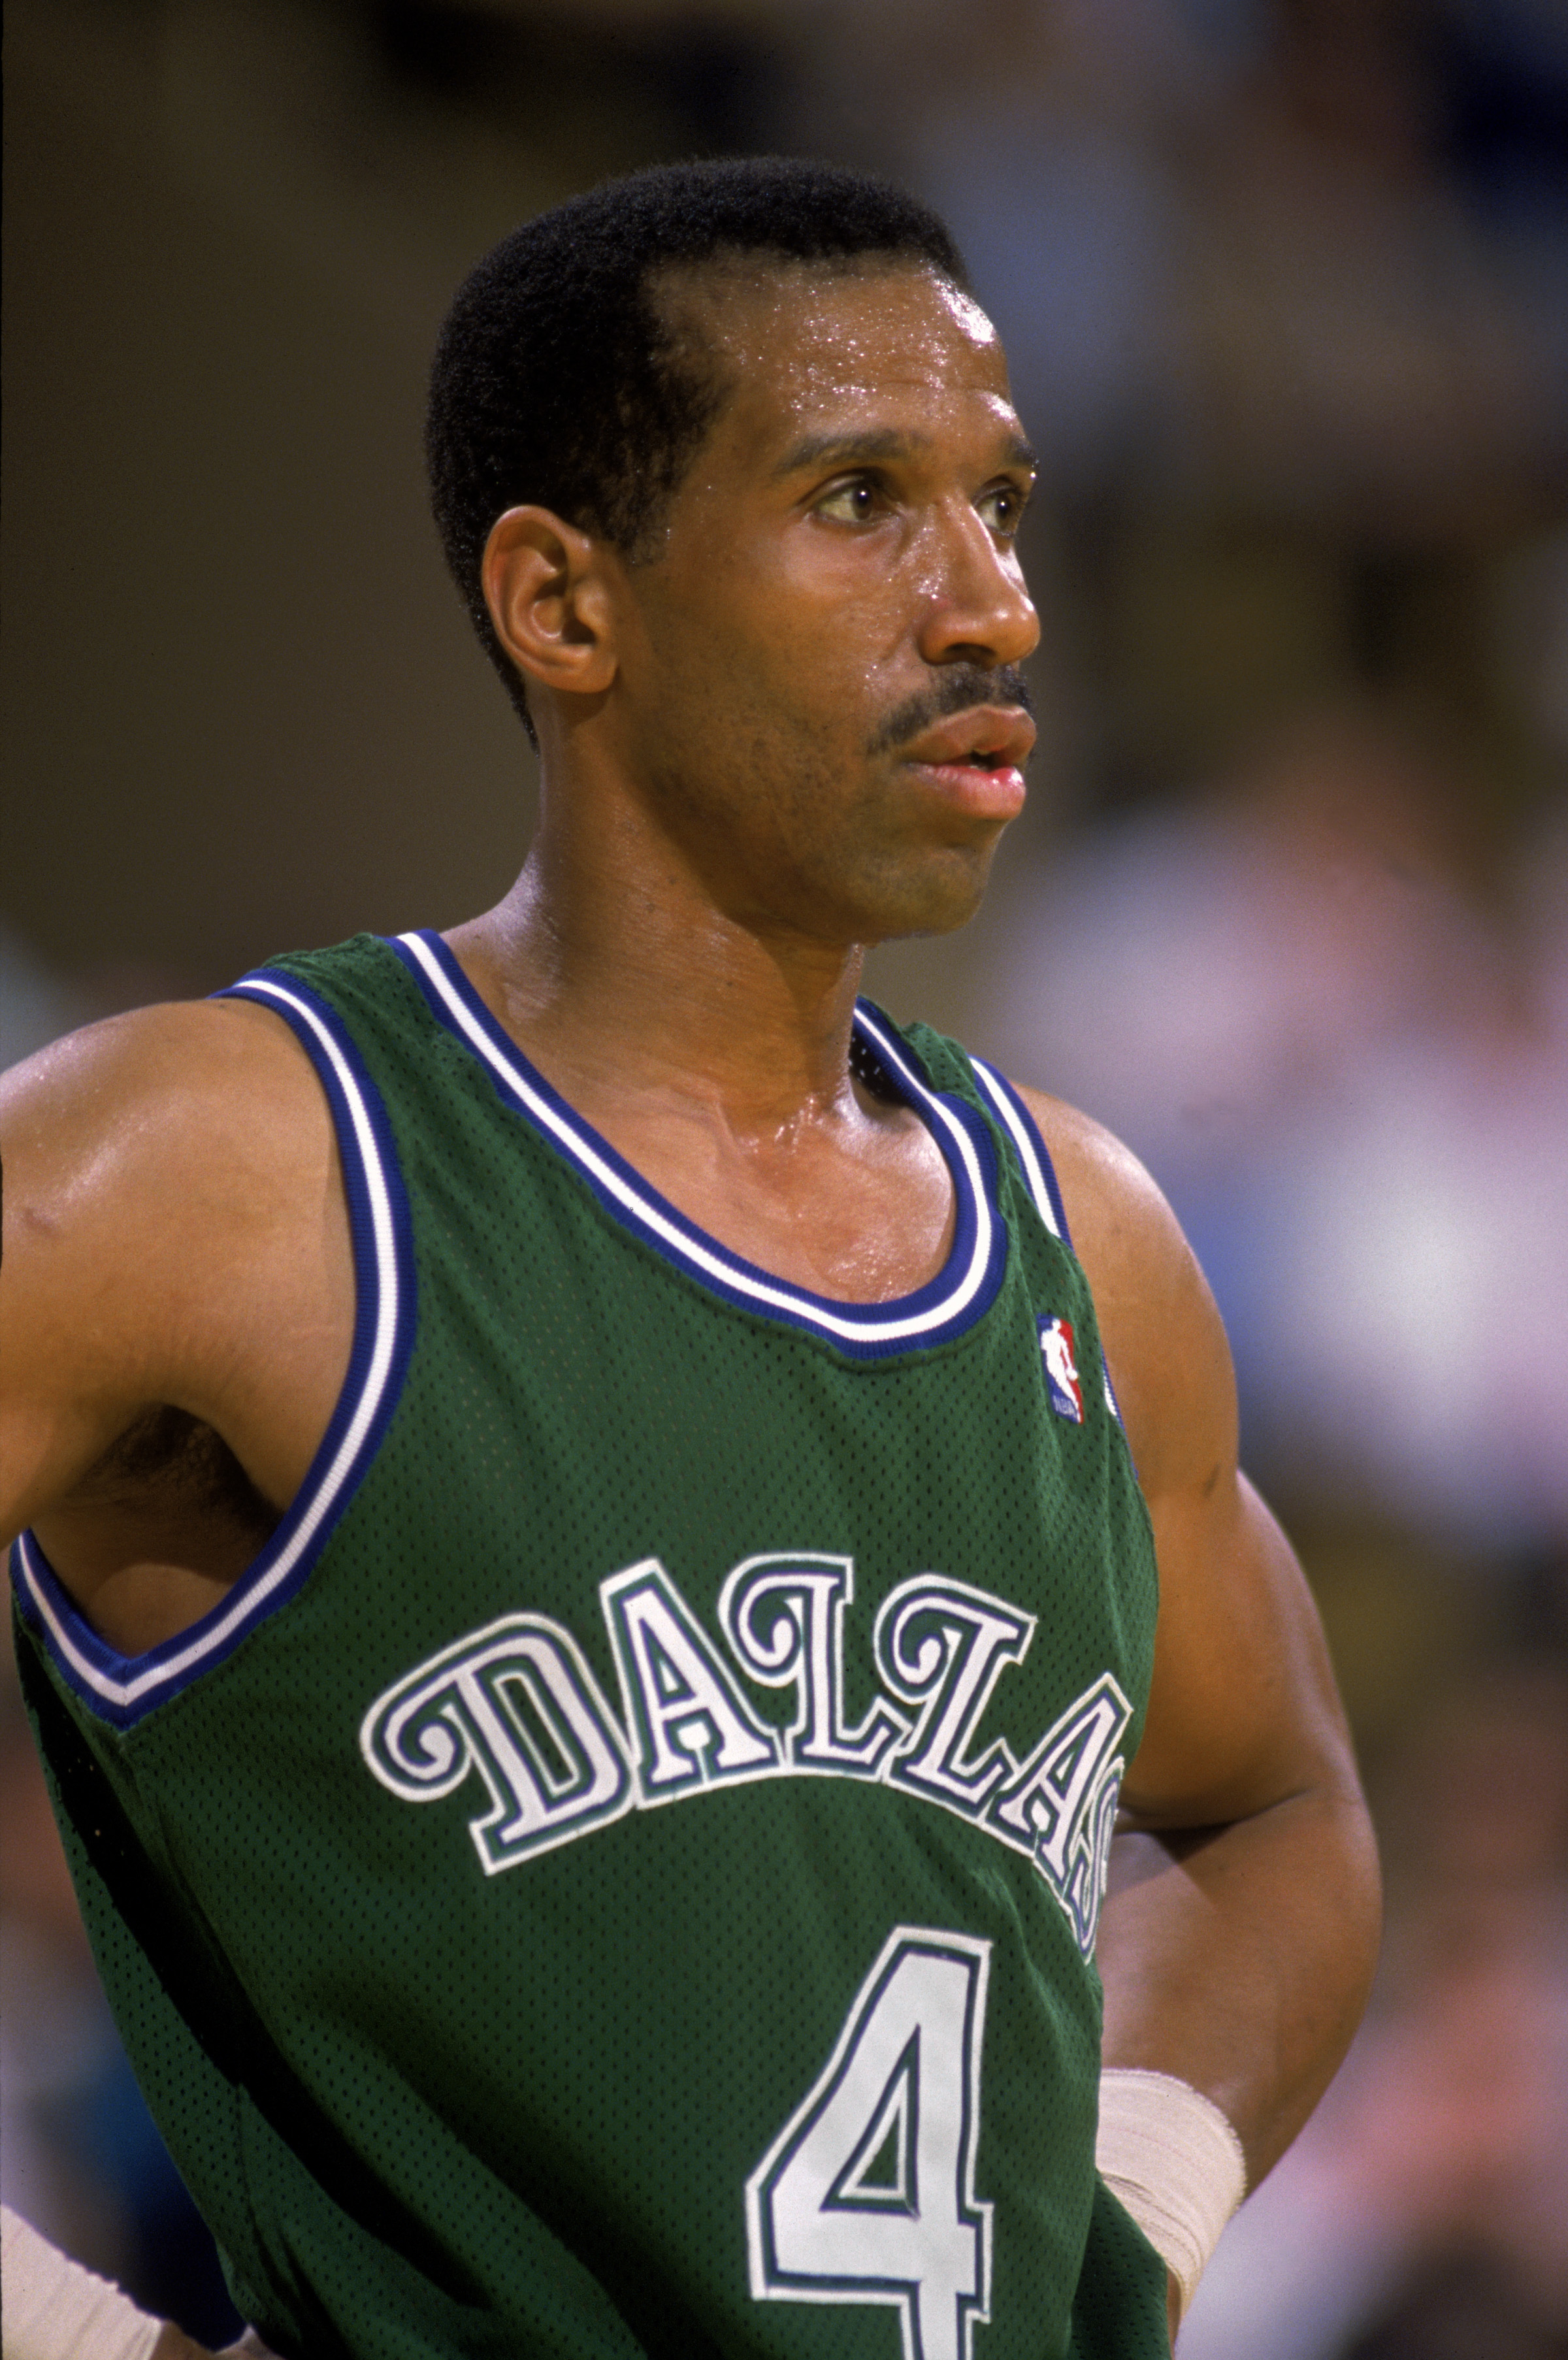 LOS ANGELES - 1989:  Adrian Dantley #4 of the Dallas Mavericks stands on the court during the NBA game against the Los Angeles Lakers at the Great Western Forum in Los Angeles, California in 1989.  (Photo by Stephen Dunn/Getty Images)